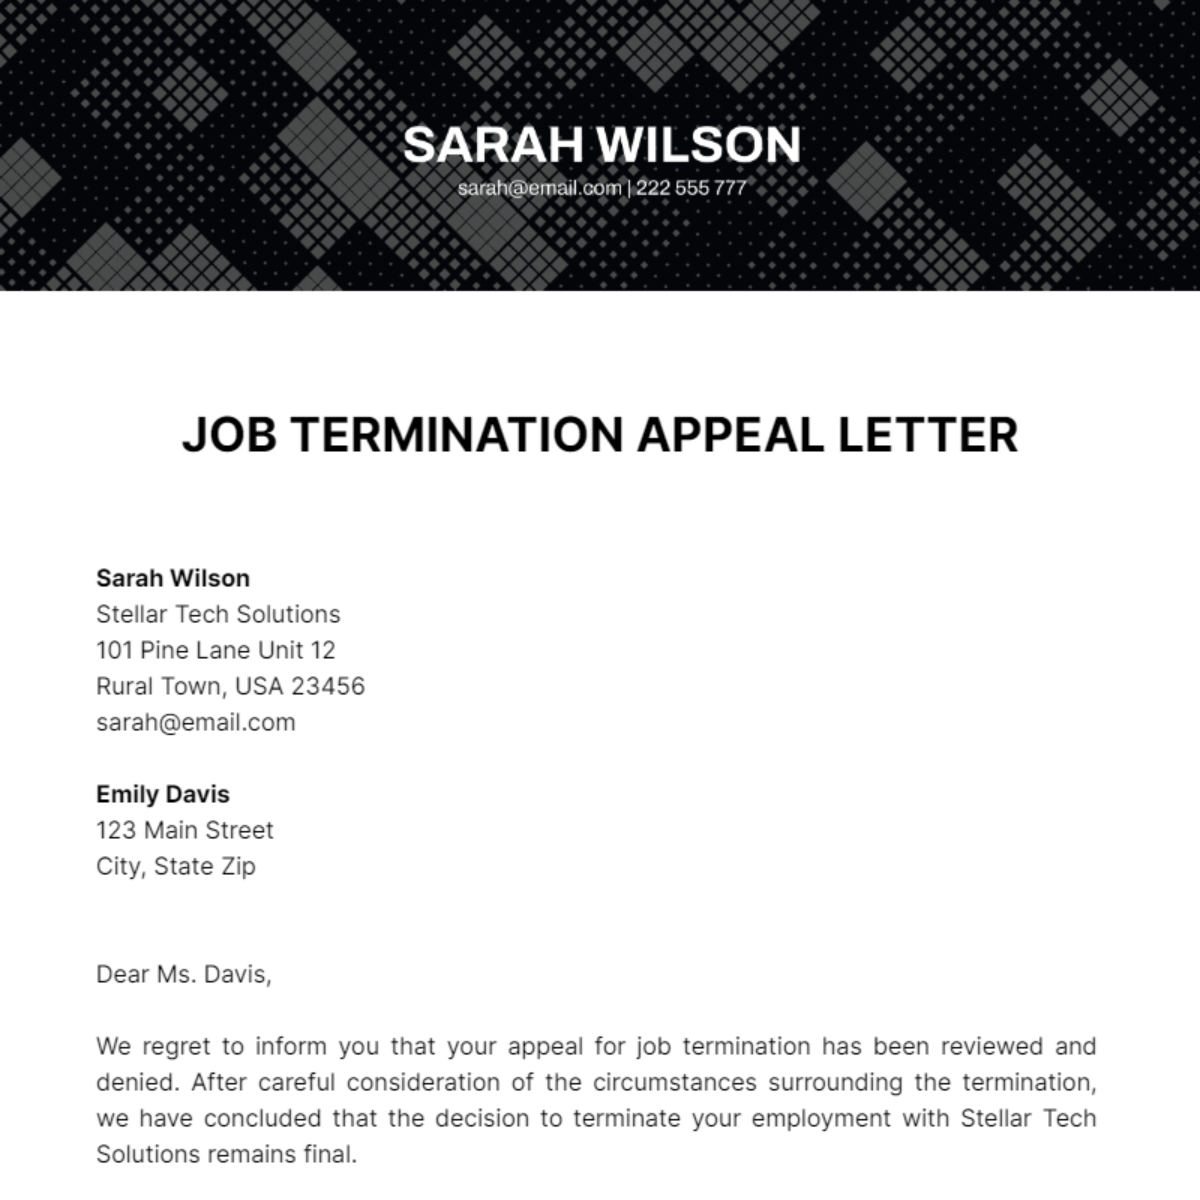 Job Termination Appeal Letter Template